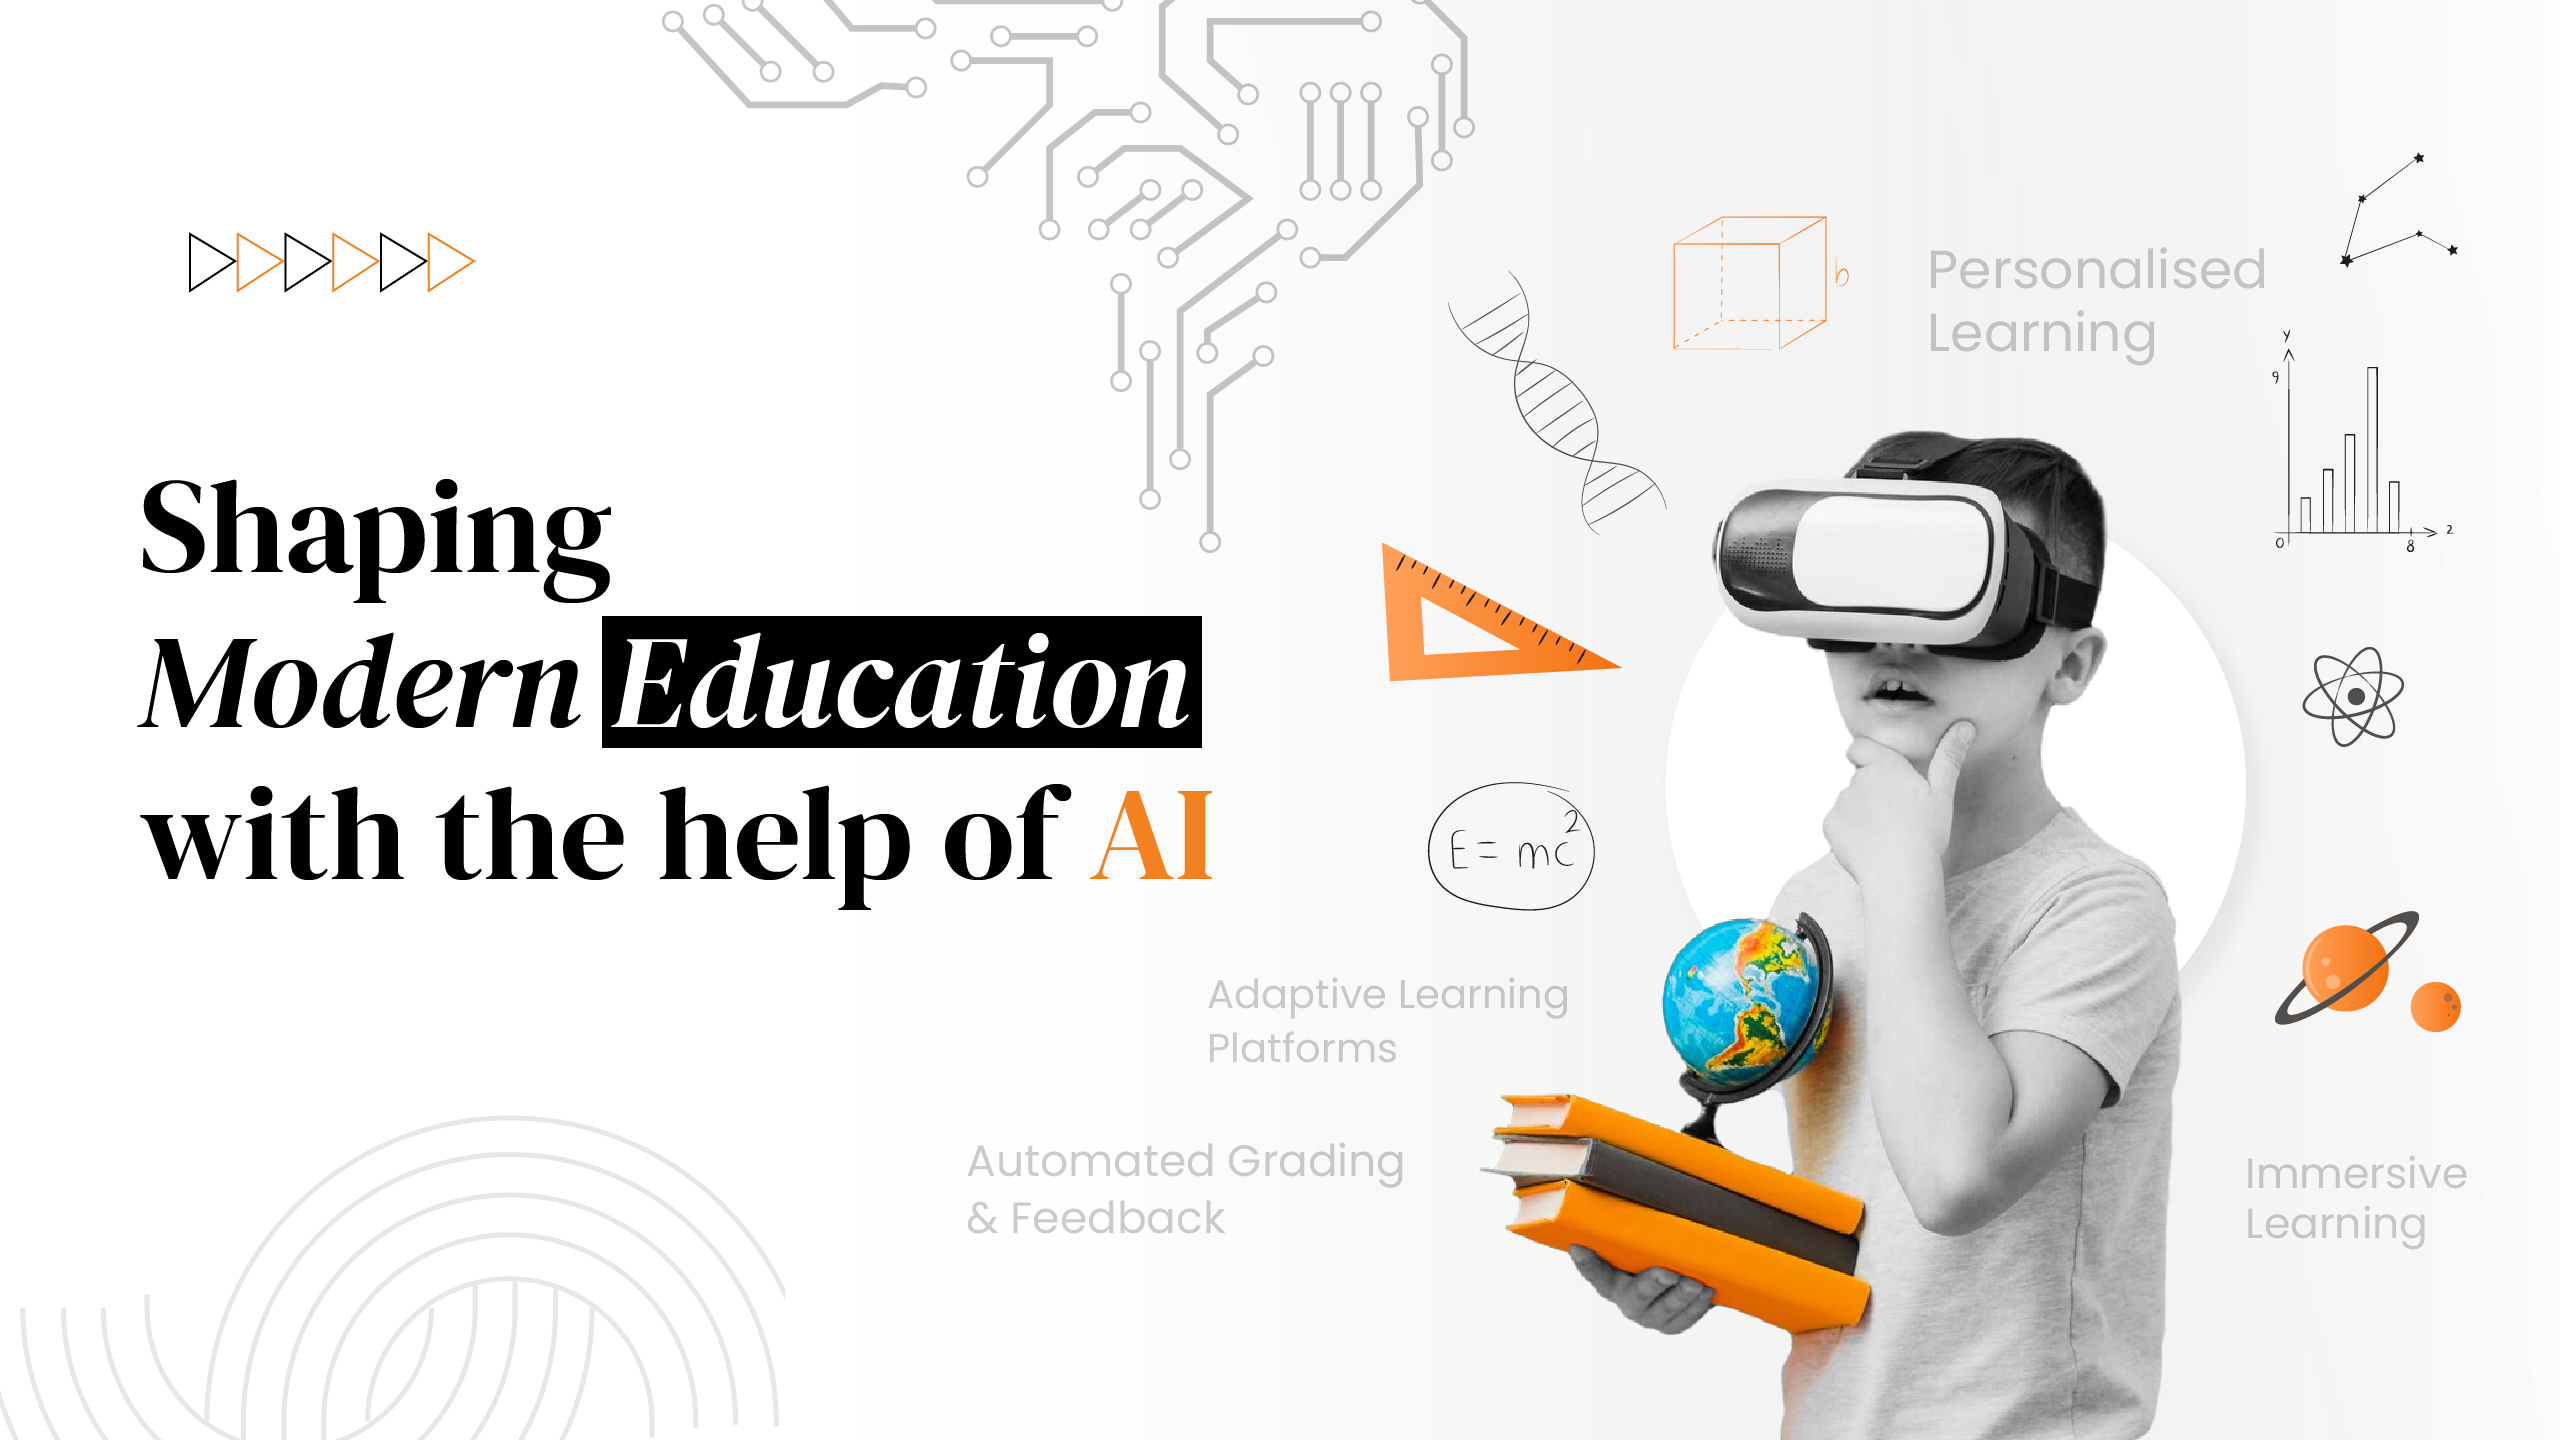 Shaping Modern Education with the help of AI